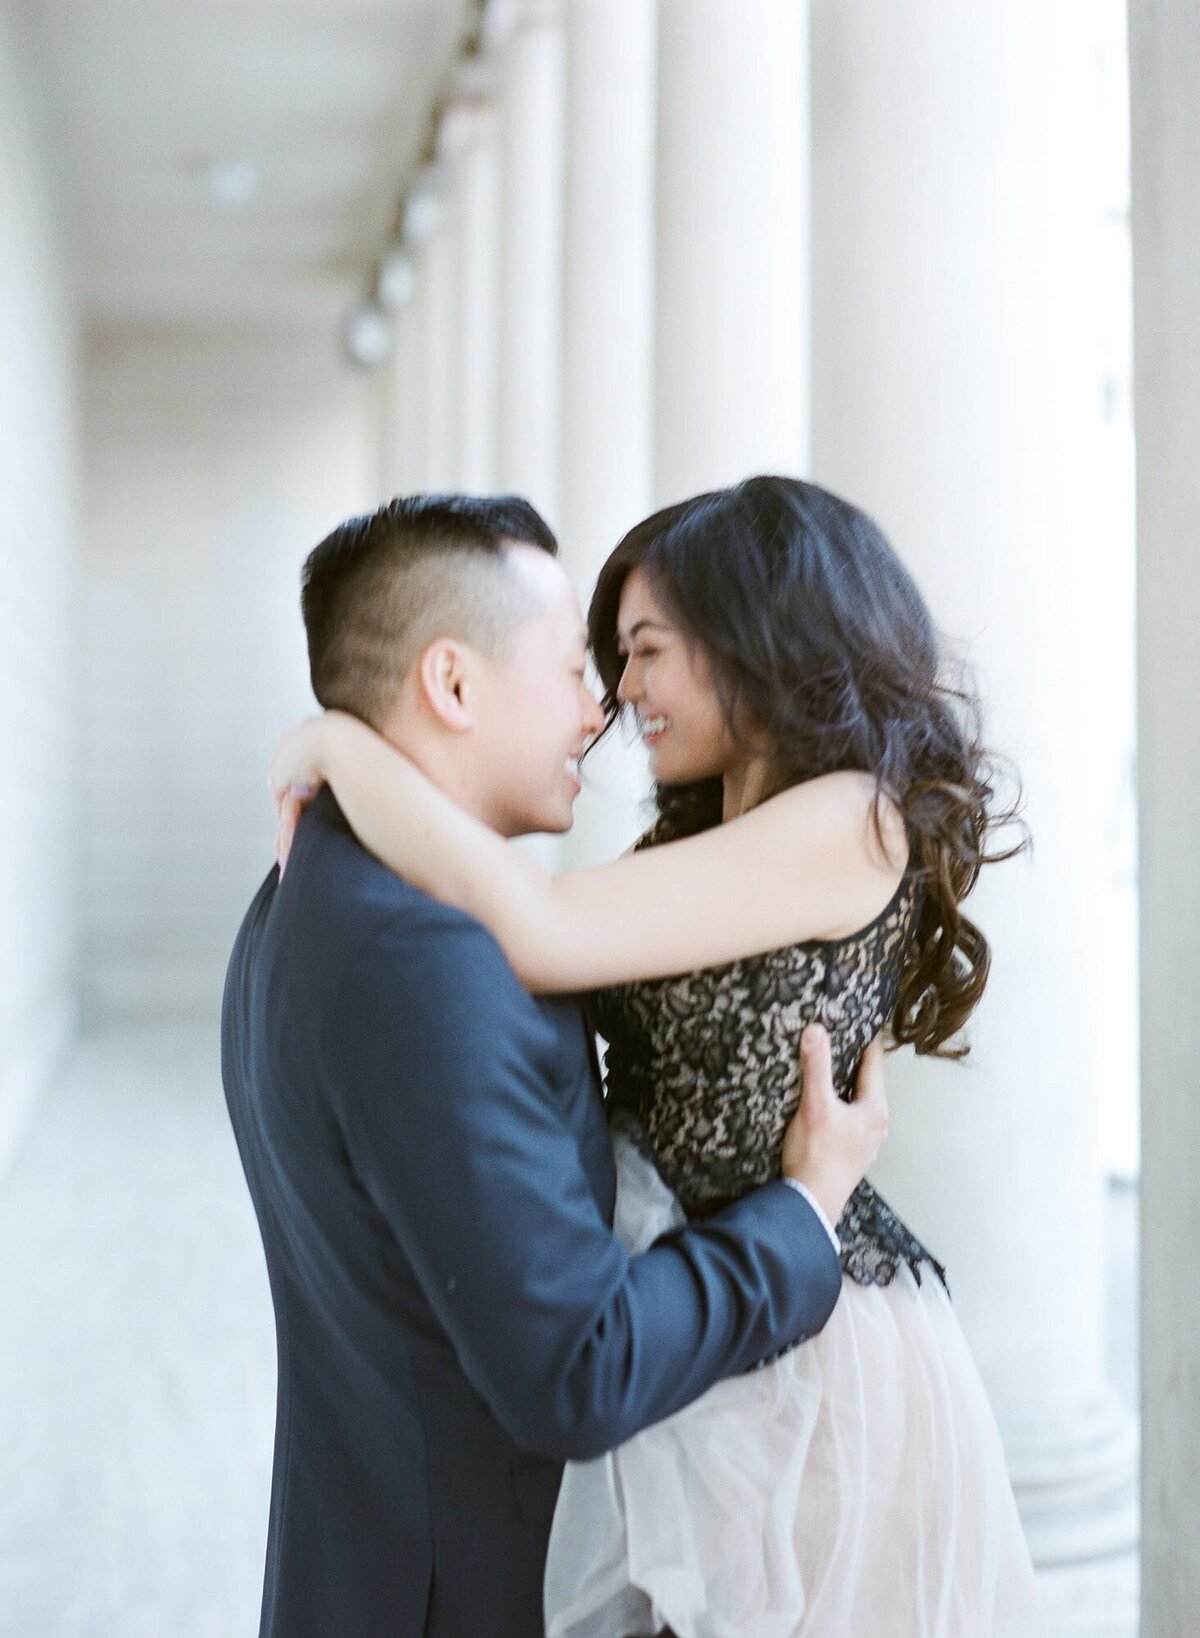 A freshly engaged couple pose for engagement photographer Robin Jolin in the Palace of Fine Arts, San Francisco.